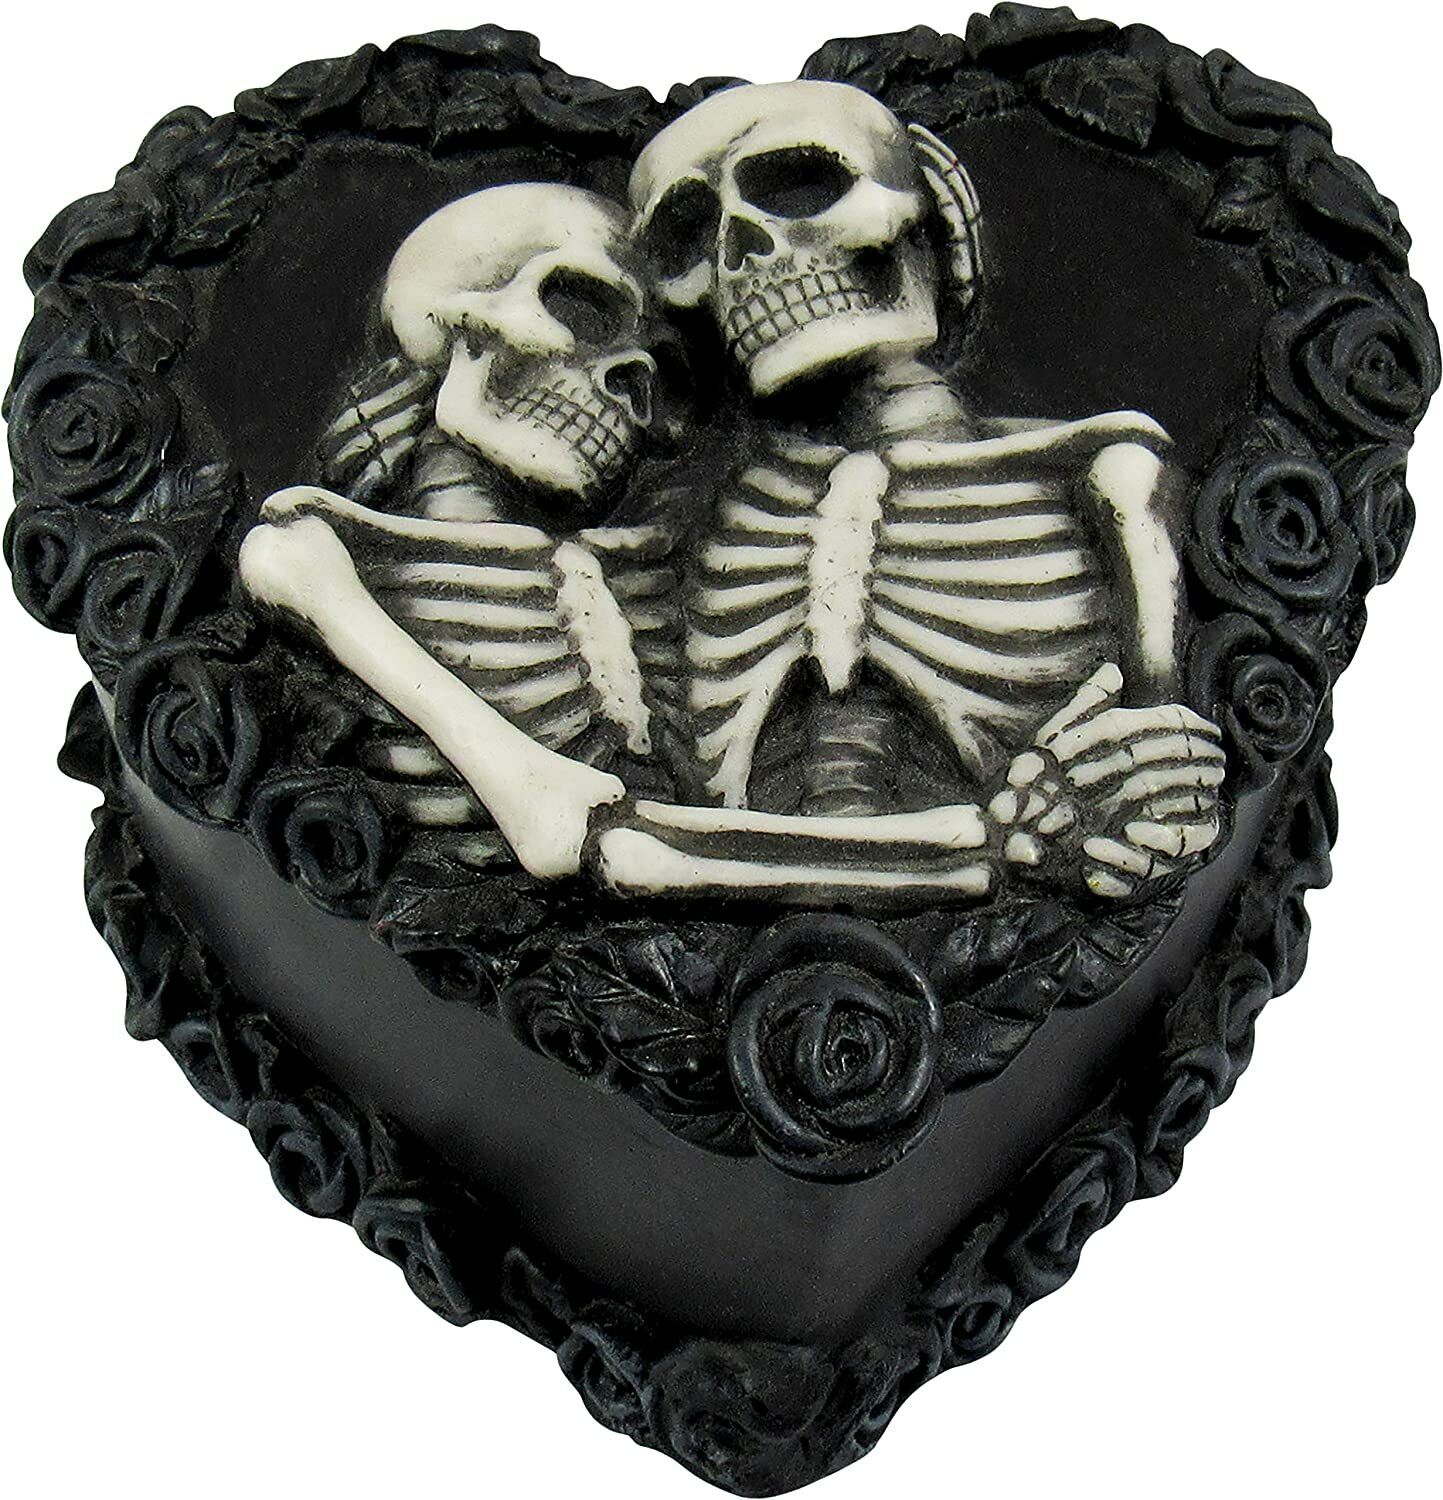 To Have & To Hold - Beautiful Gothic Skeleton Lovers, 5 Inches 